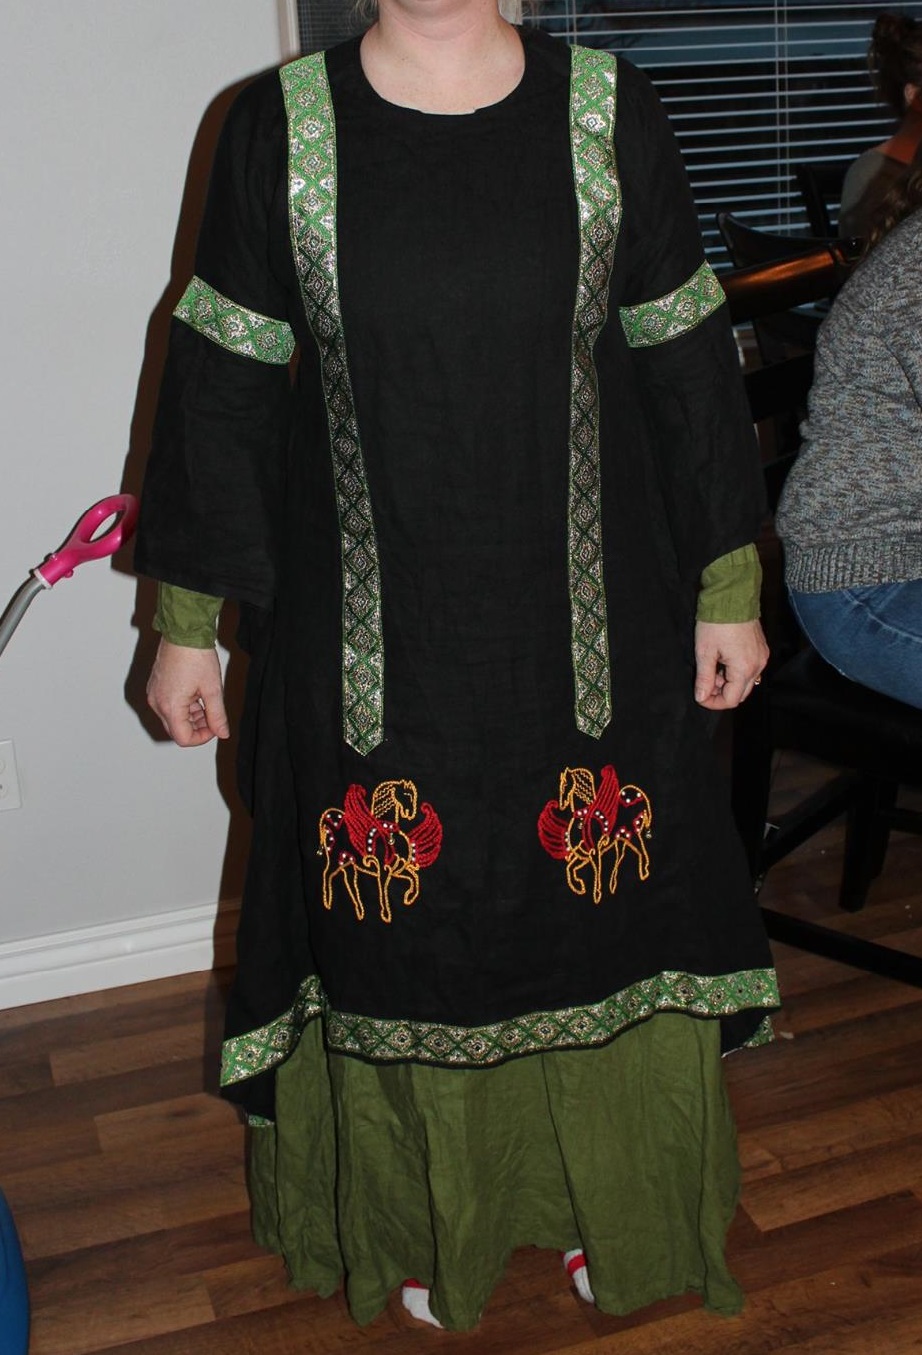 Elise, This is a byzantine dress with a mullet hemline (short in the front, long in the back). The embroi...